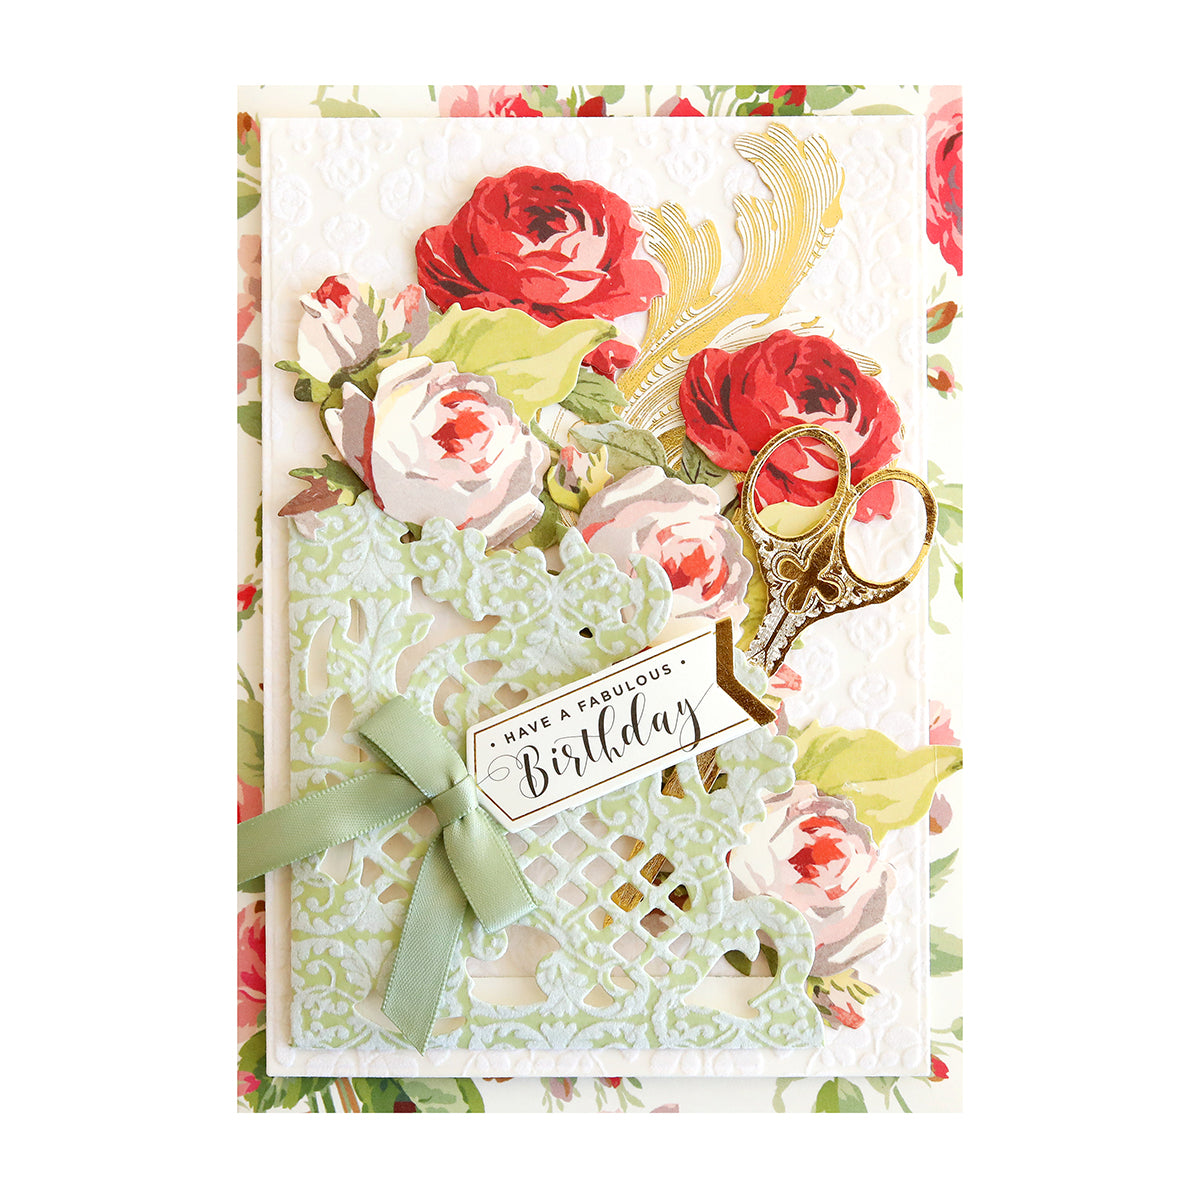 An elegant card featuring a beautiful rose design and delicate scissors, part of the Anniversary Pocket Dies. Perfect for creating heartfelt anniversary greetings.